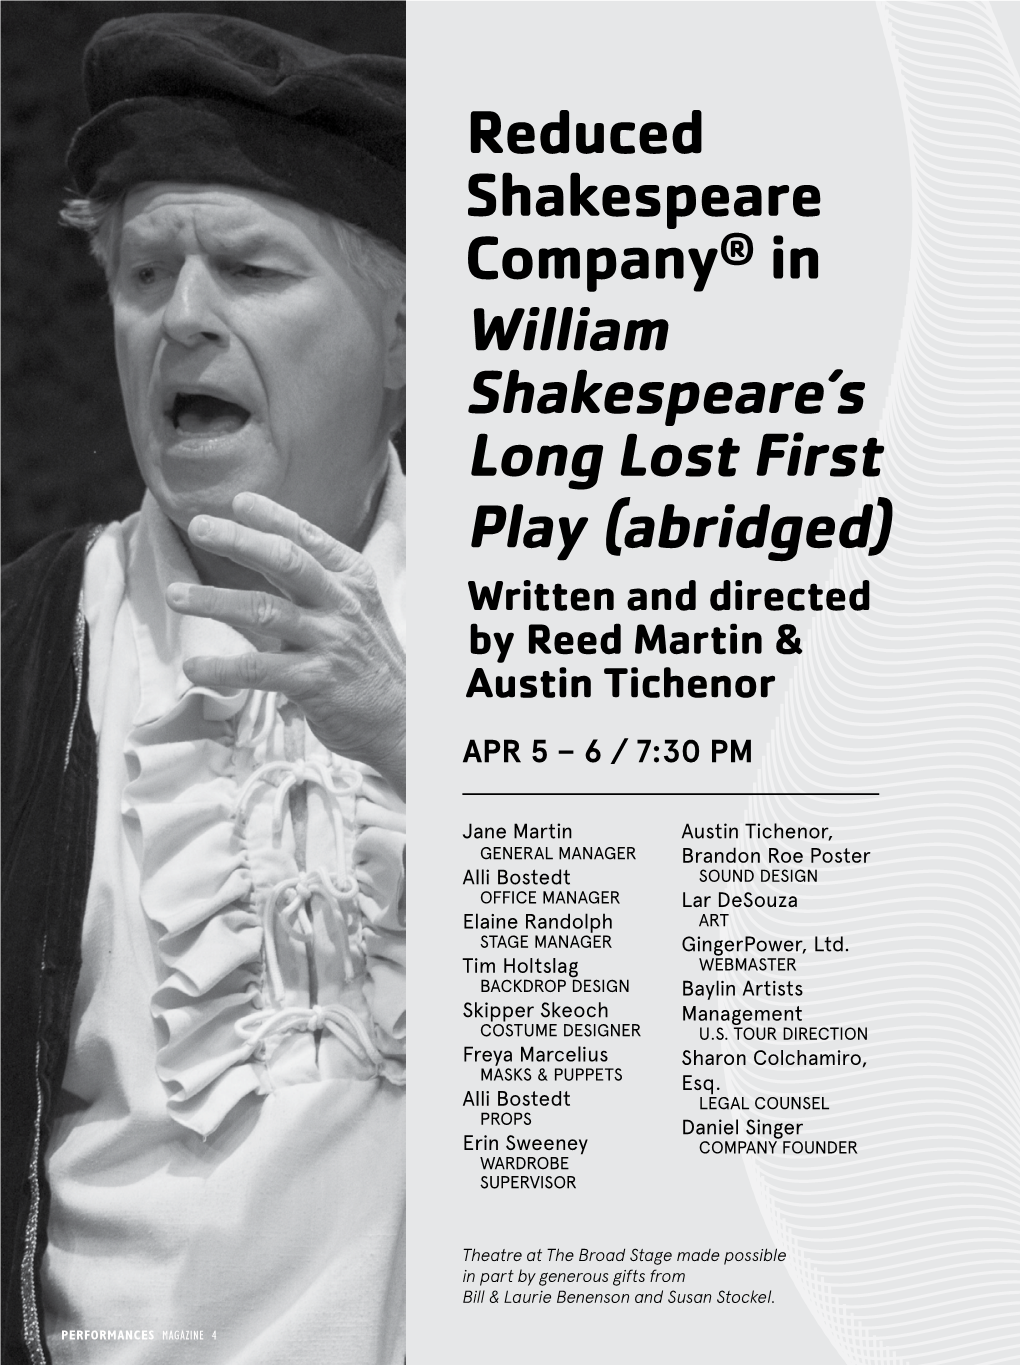 Reduced Shakespeare Company® in William Shakespeare's Long Lost